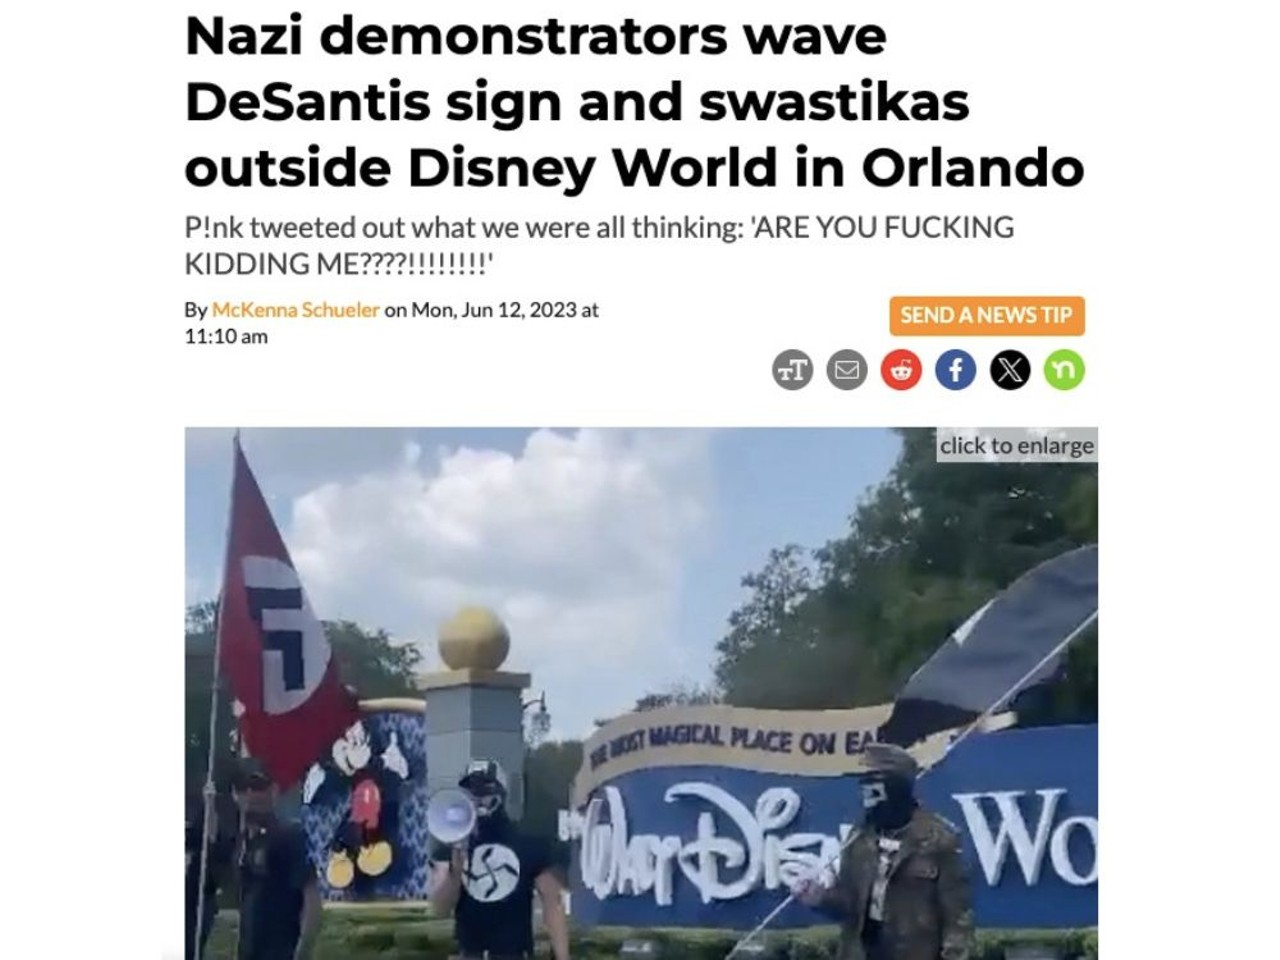 Video footage and photos shared online this summer showed Nazi demonstrators waving large swastika flags outside of Orlando’s Walt Disney World on Saturday, along with a "Ron DeSantis 2024" flag. Read full article